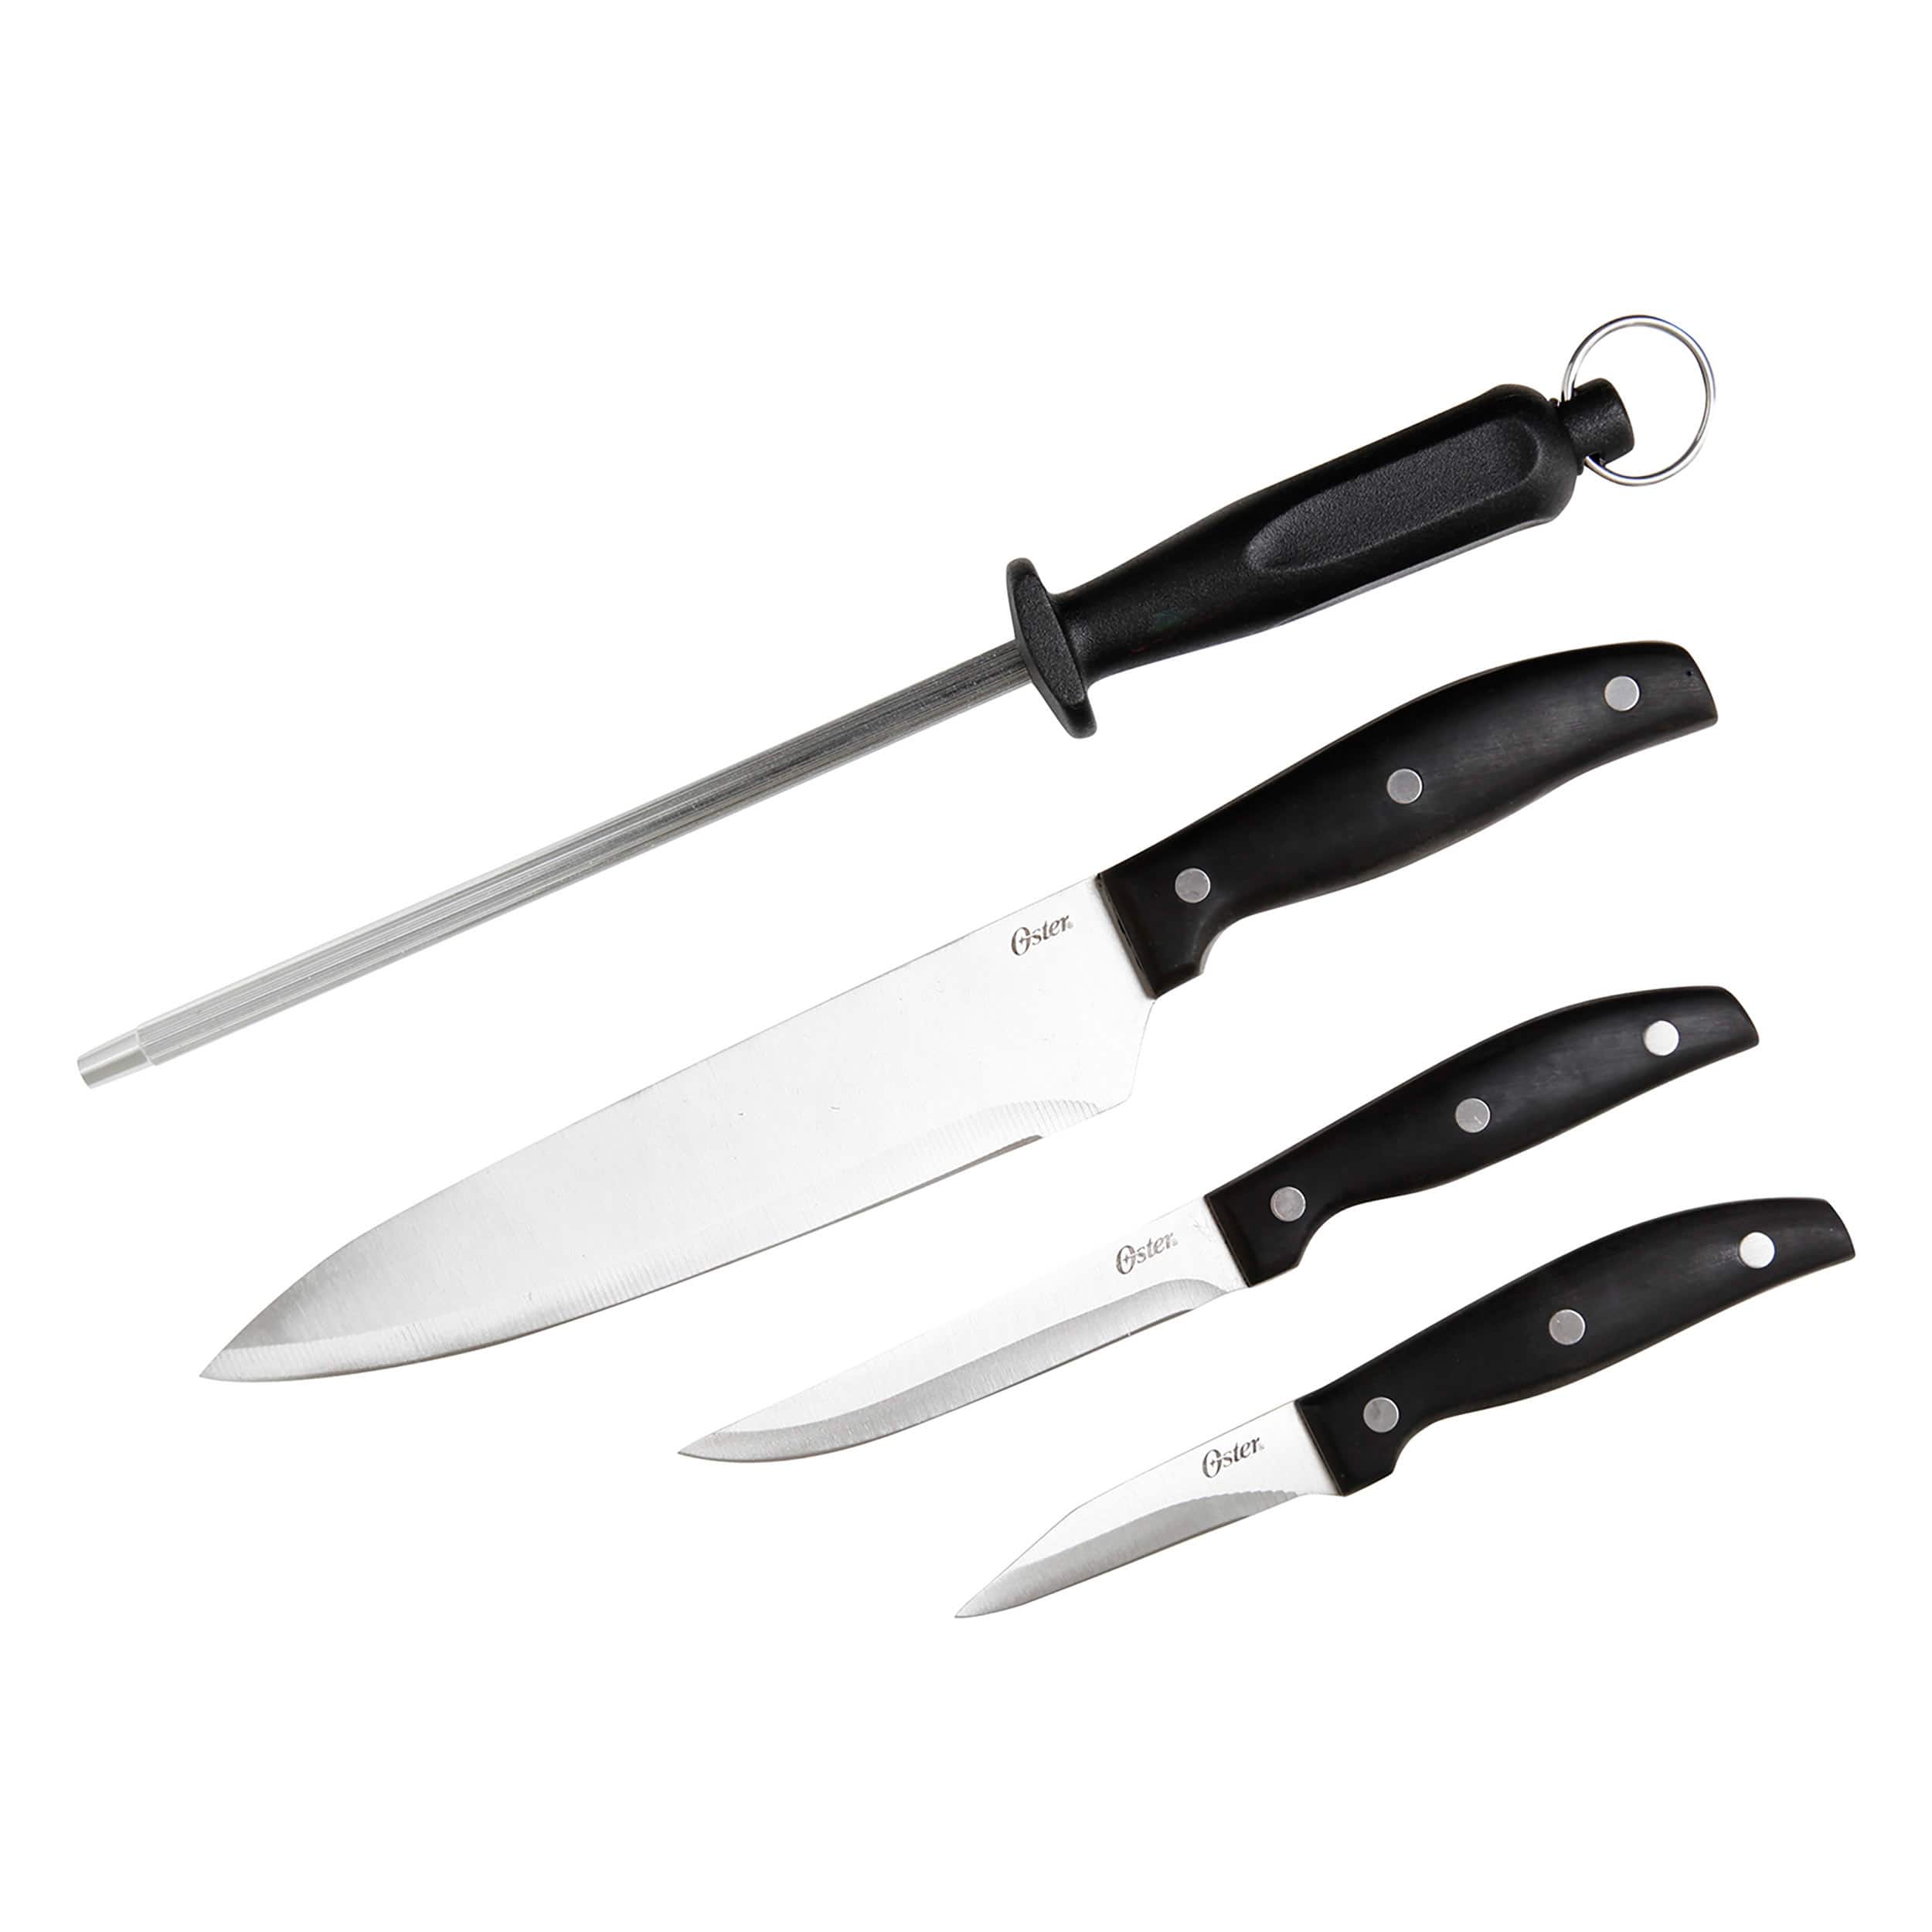 Oster Granger 4 Piece Stainless Steel Cutlery Set in Black | Michaels